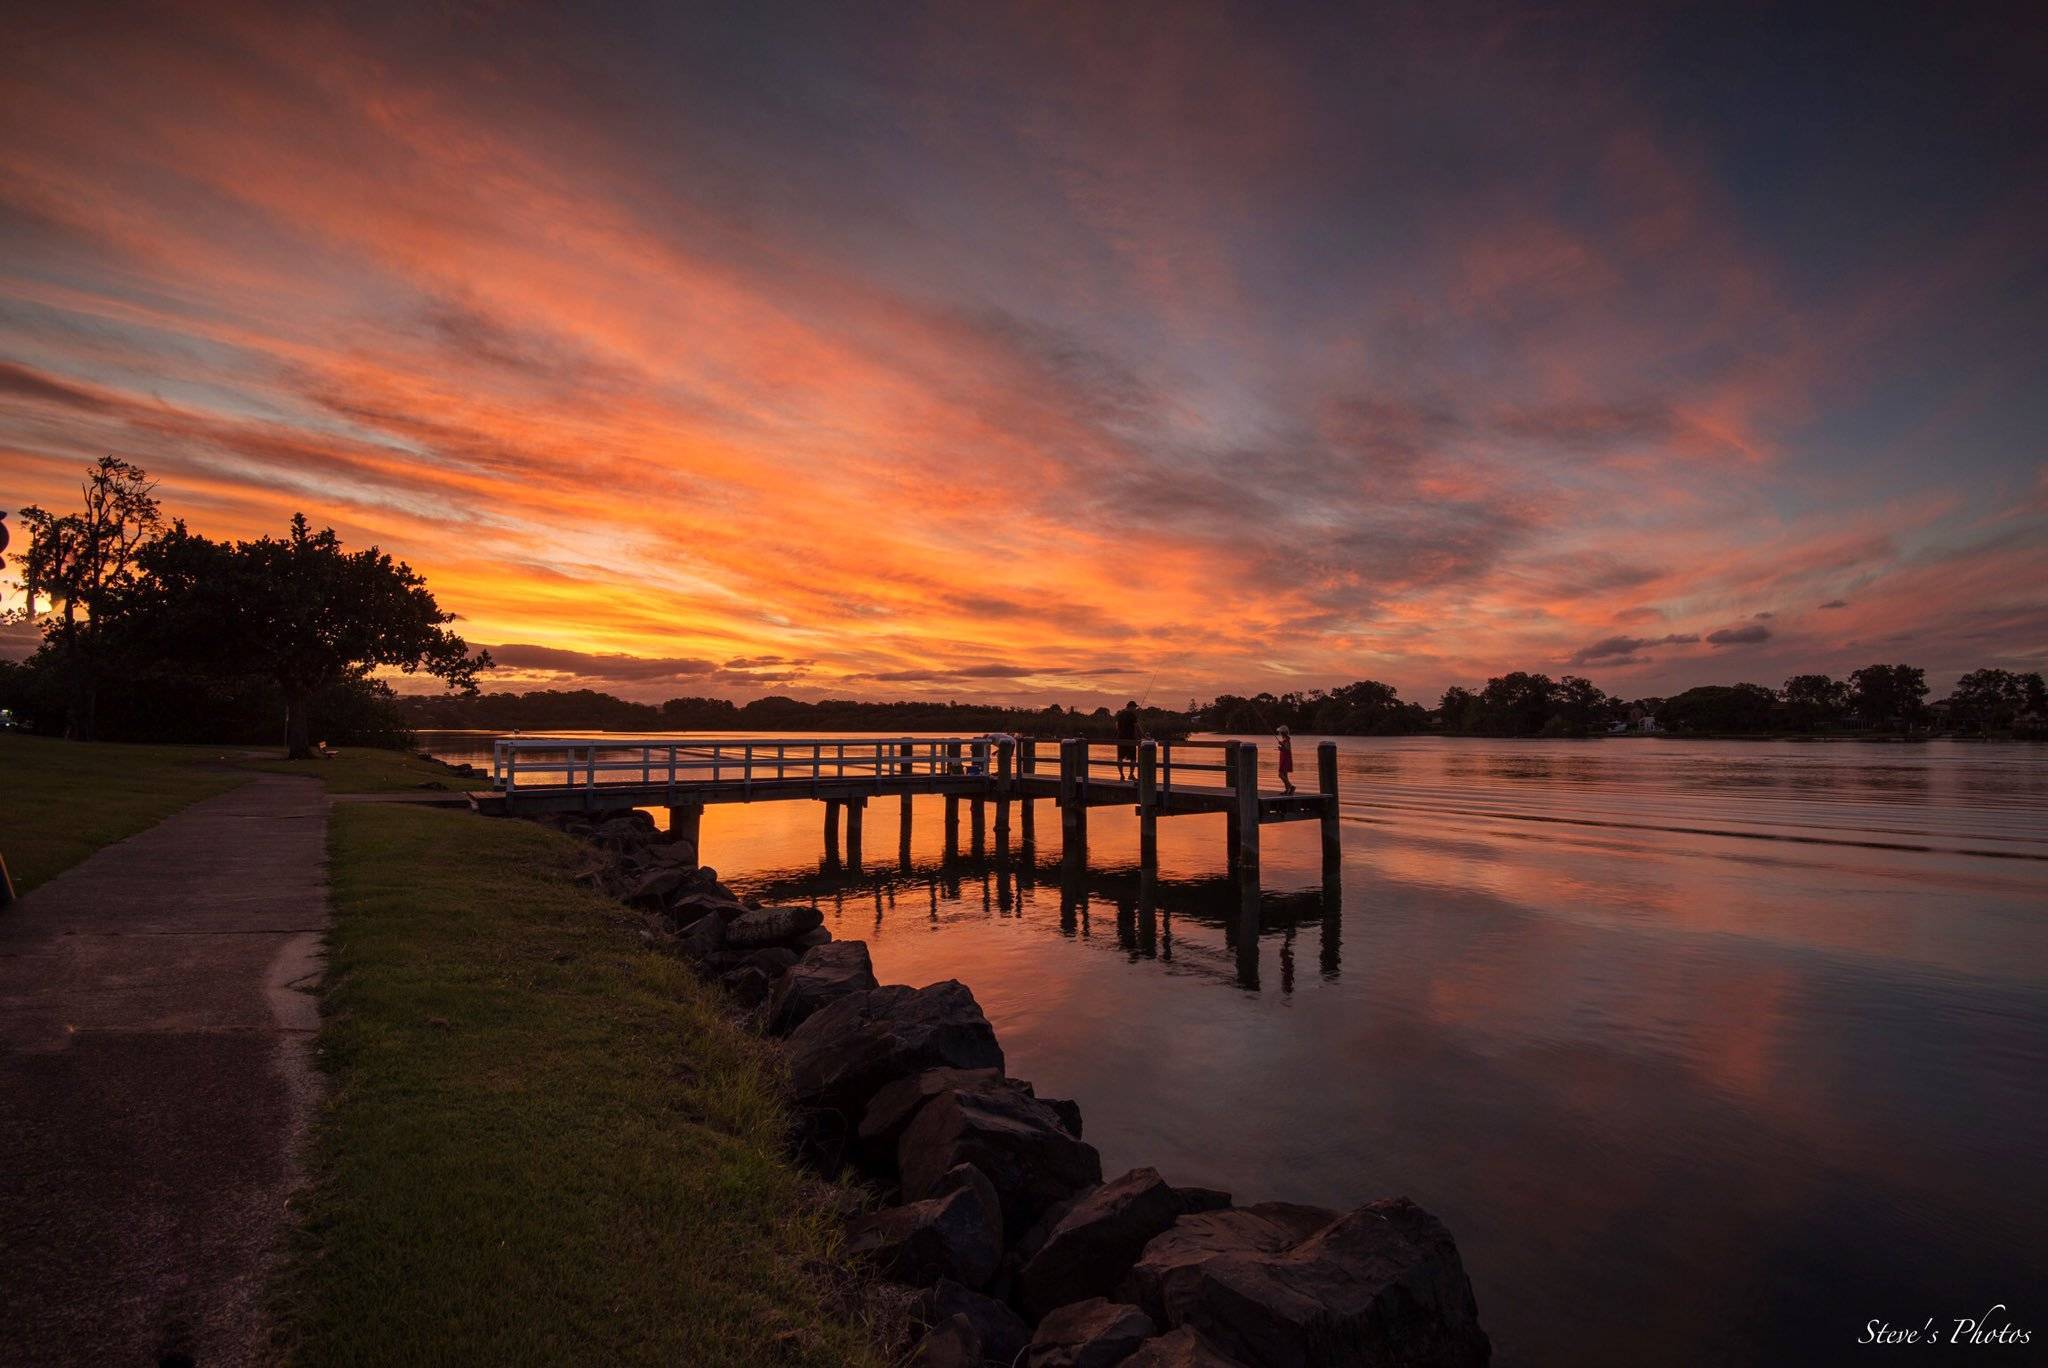 Sunset from the Tweed River, New South Wales, Australia by Steve Berardi @Marcus_0312